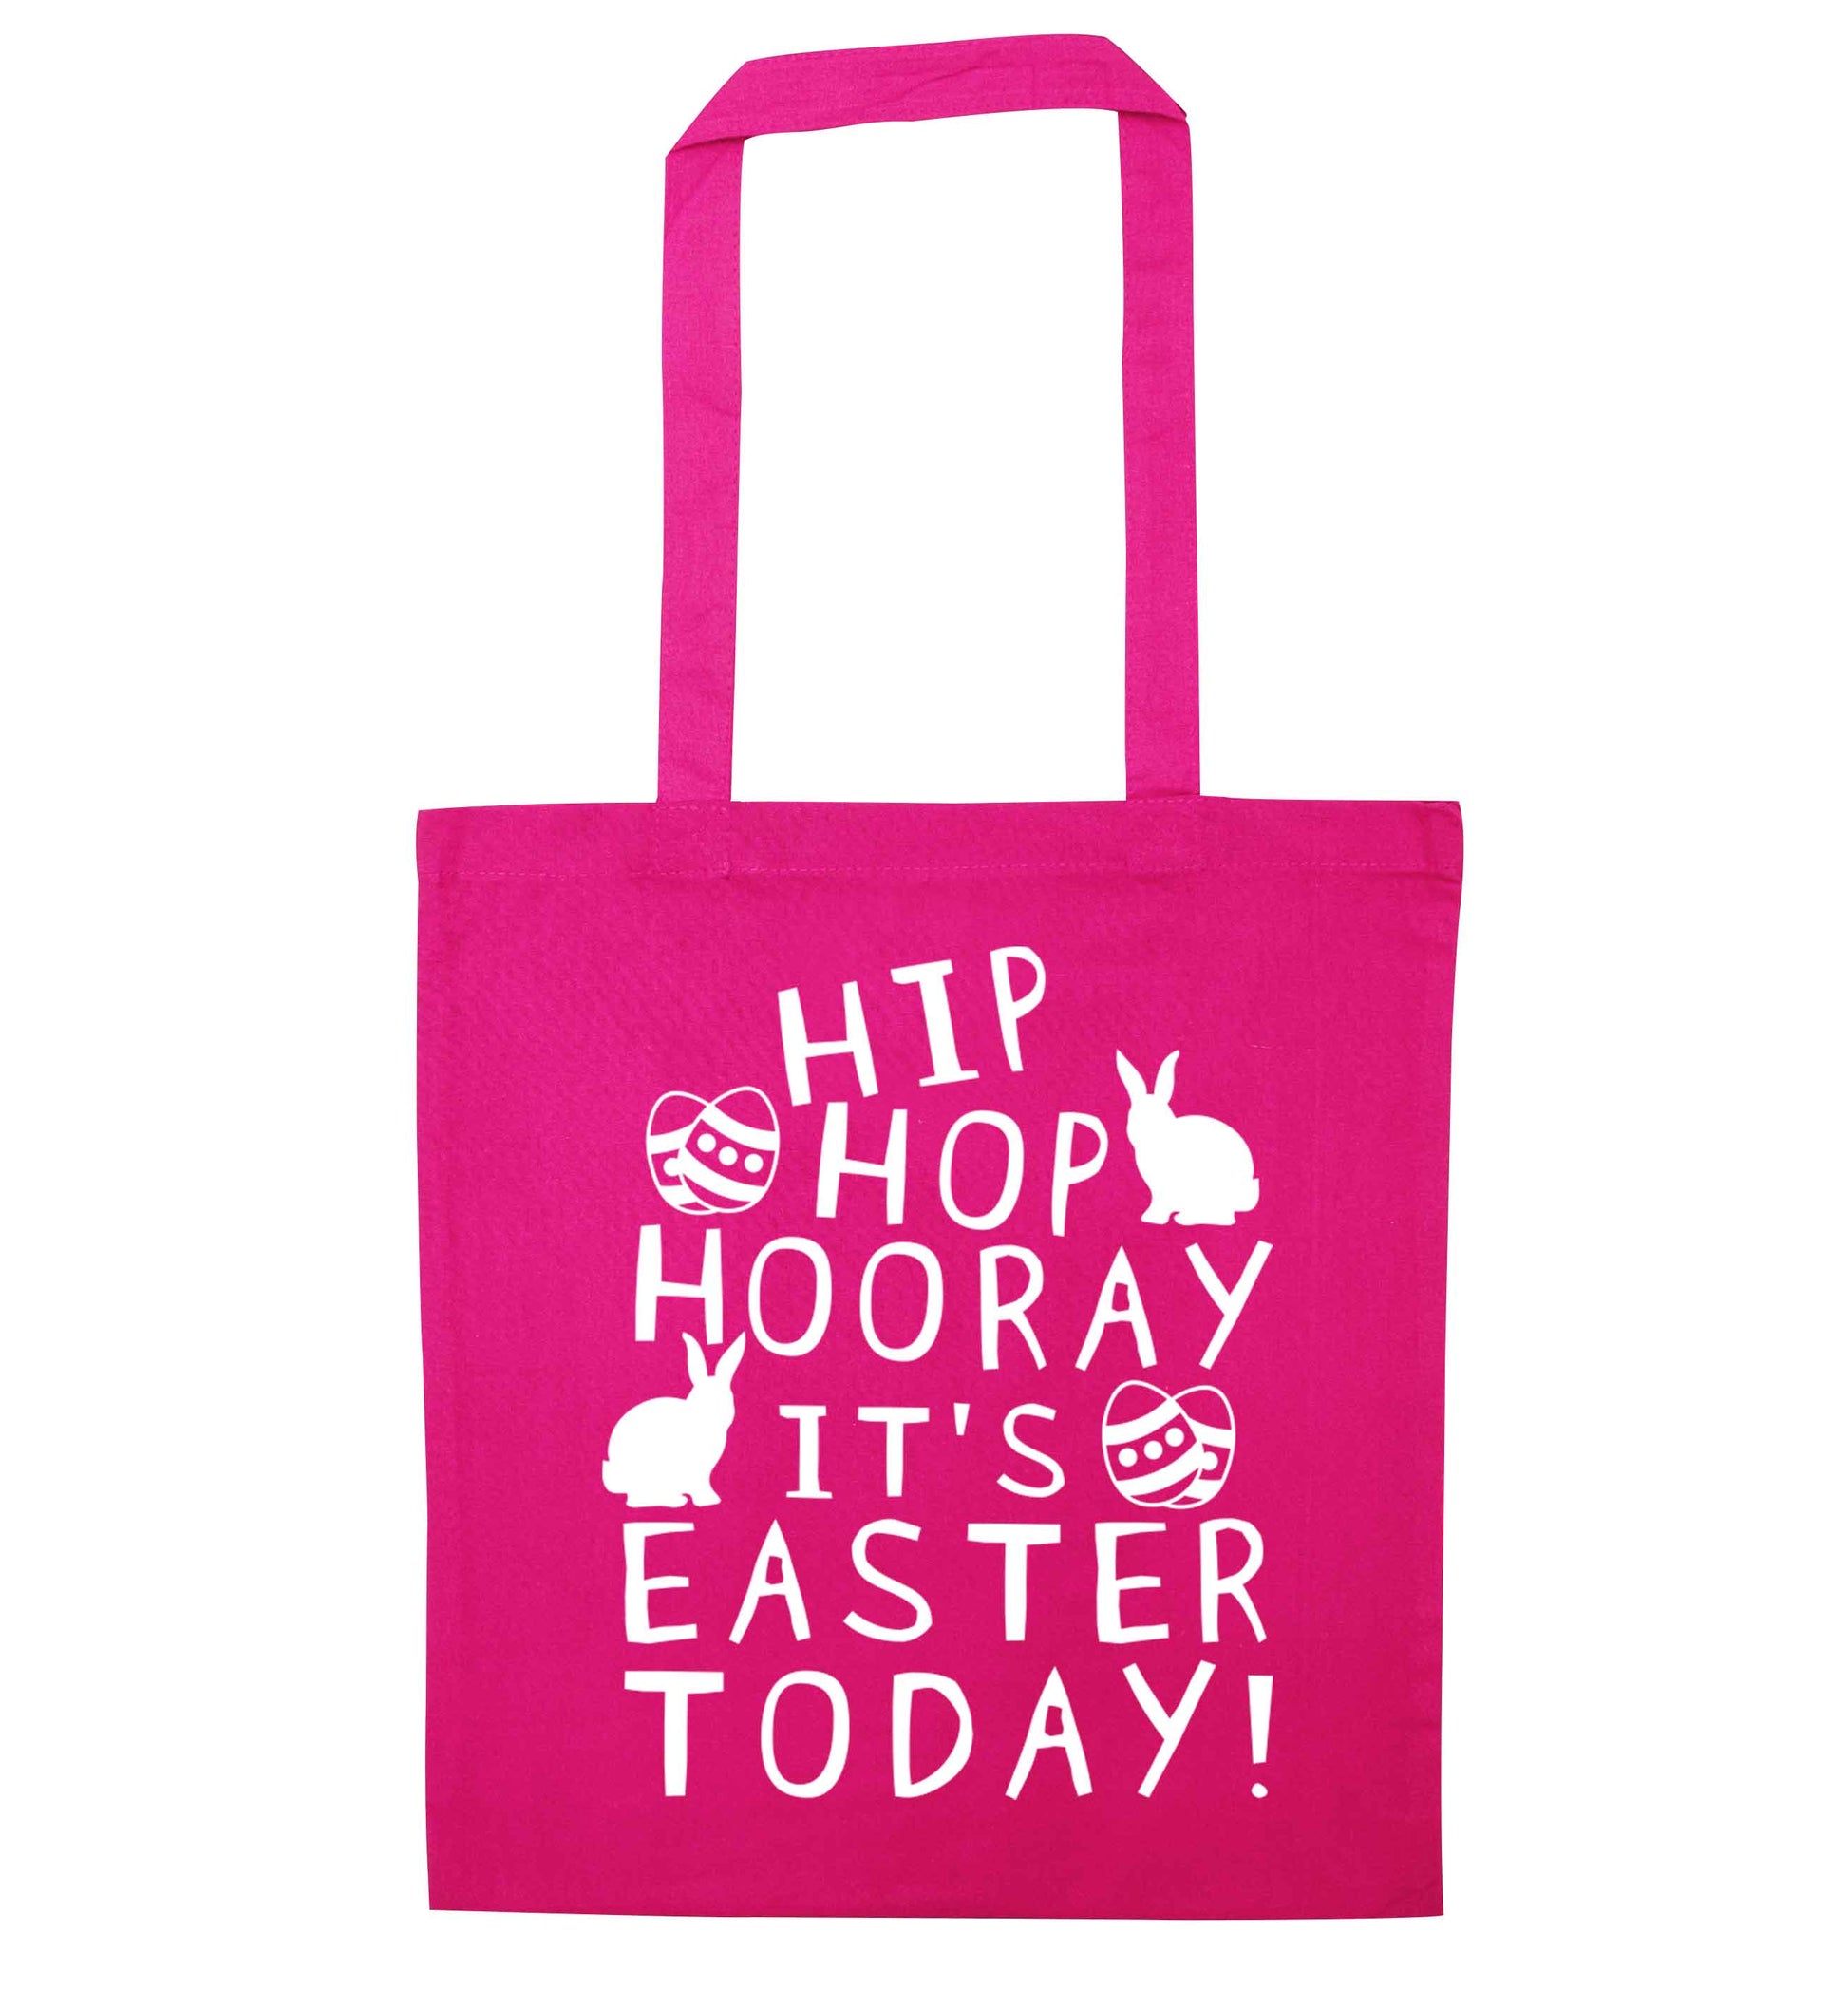 Hip hip hooray it's Easter today! pink tote bag